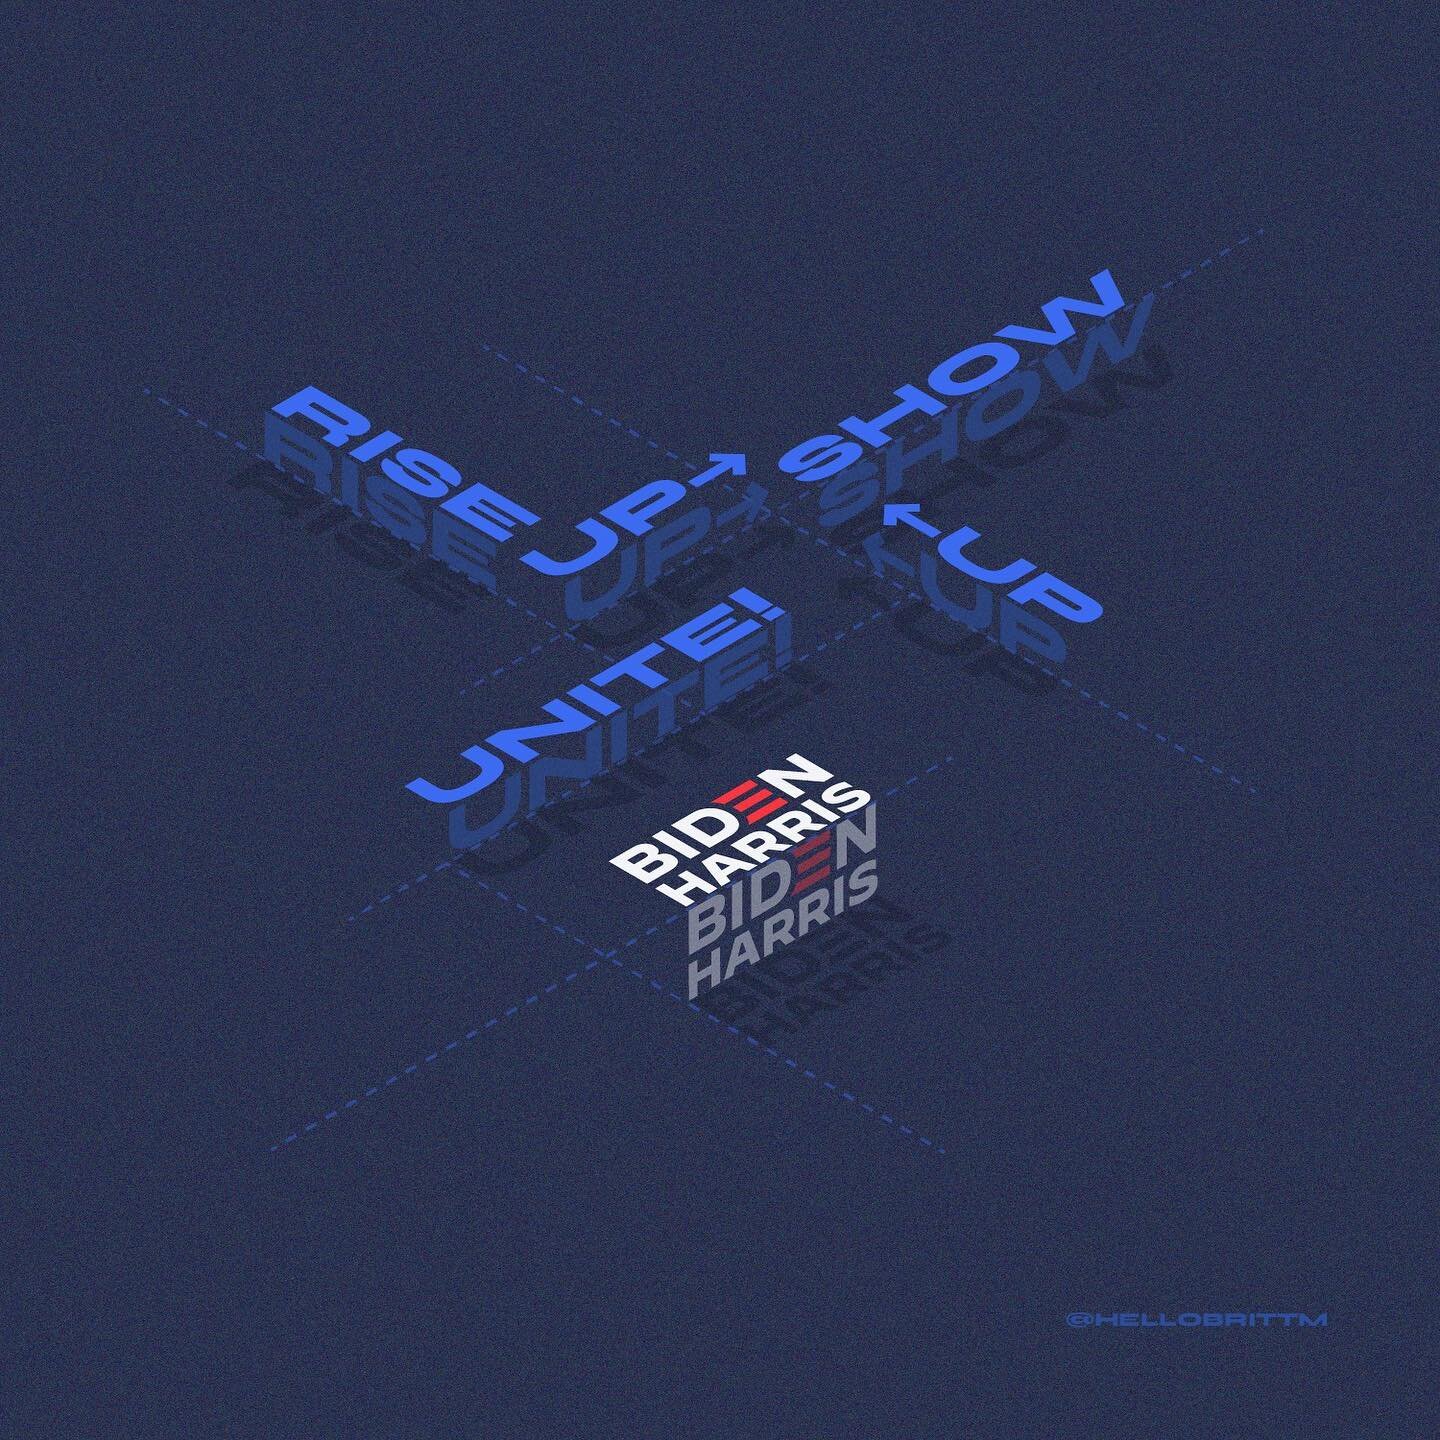 One week until Election Day! #bidenharris2020

Experimenting with isometric text to create 3D effect artwork for the #riseupshowupunite grassroots movement in support of Biden/Harris. 

Thanks to @bonjourmonde for the great opensource typeface #synee